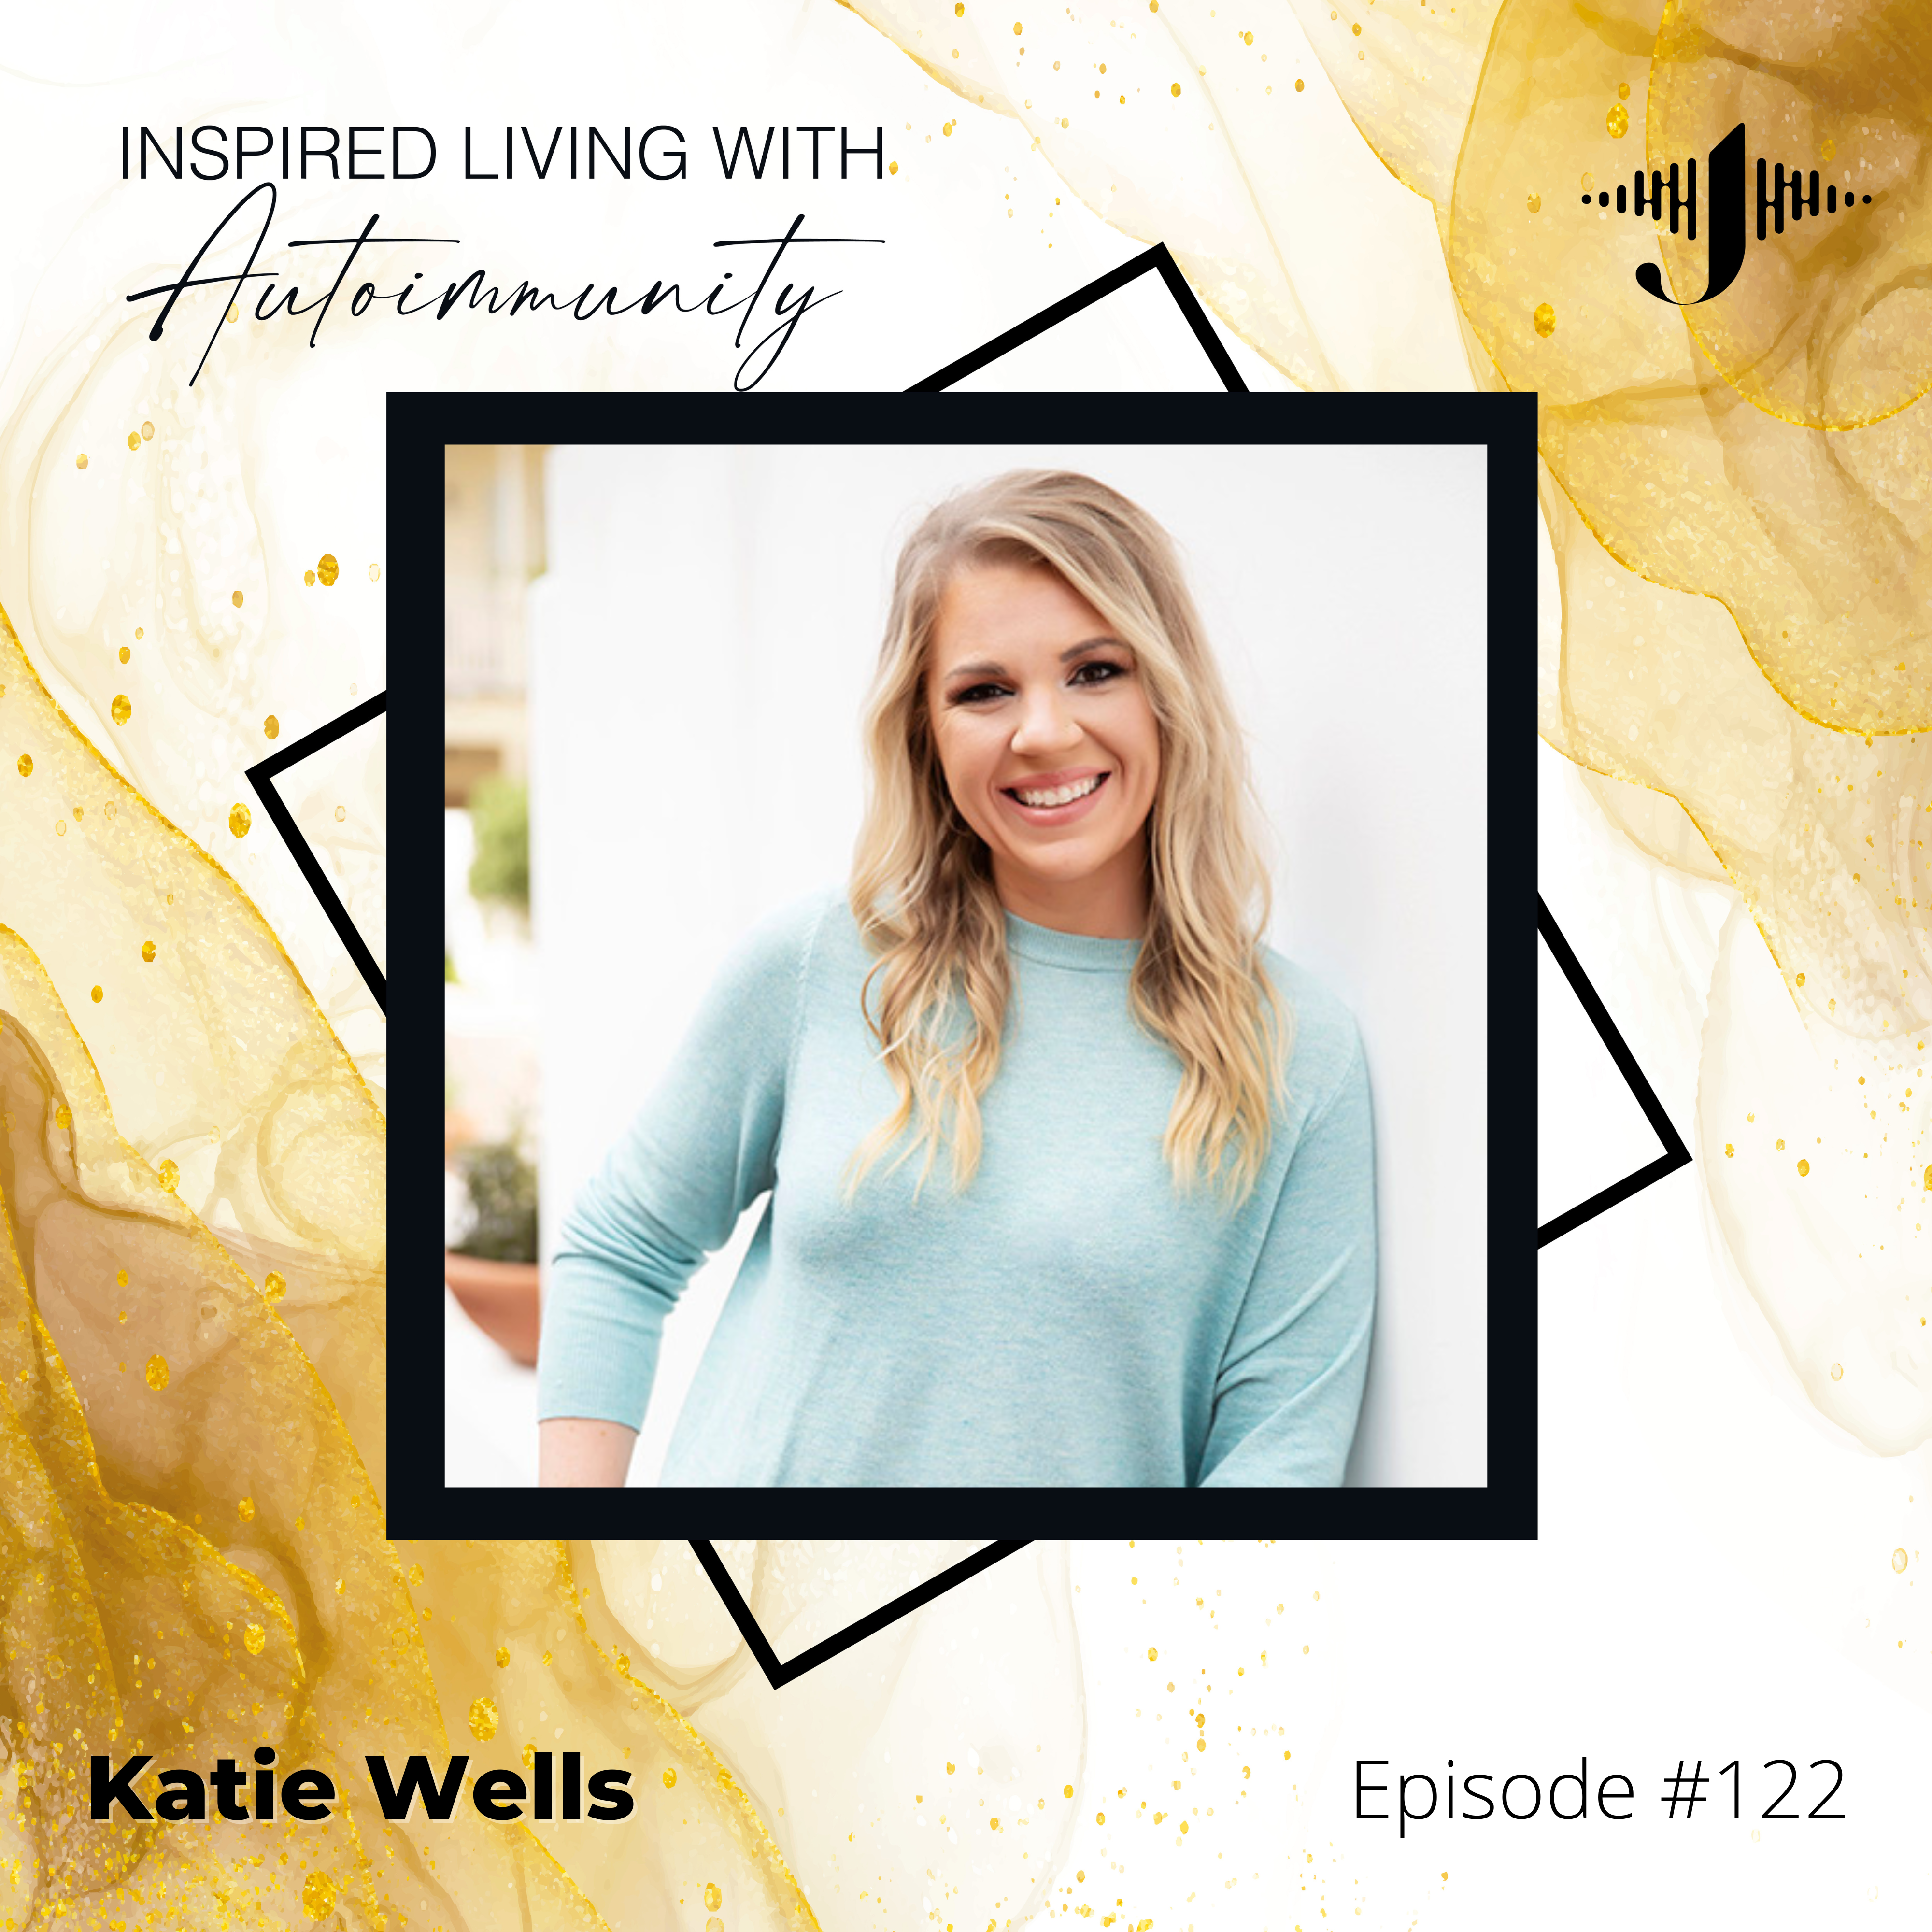 Katie Wells: The Journey to Wellness: Transforming Personal Care One Step at a Time